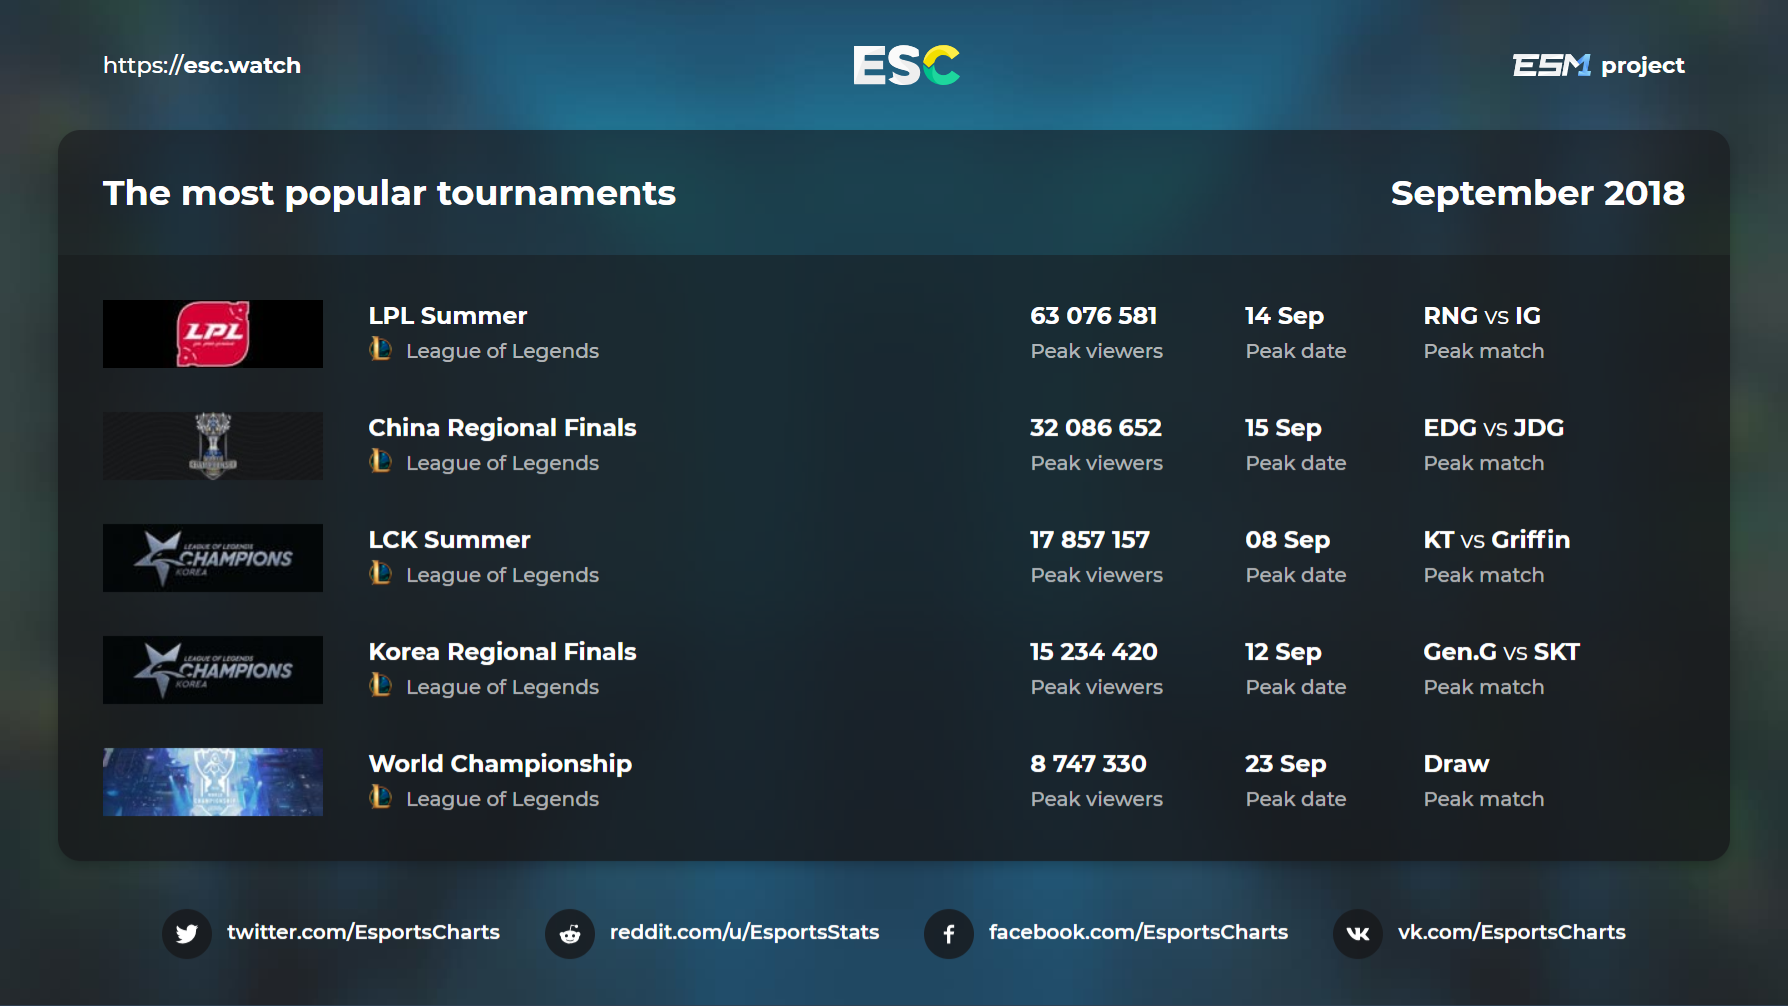 The most popular tournaments of September 2018